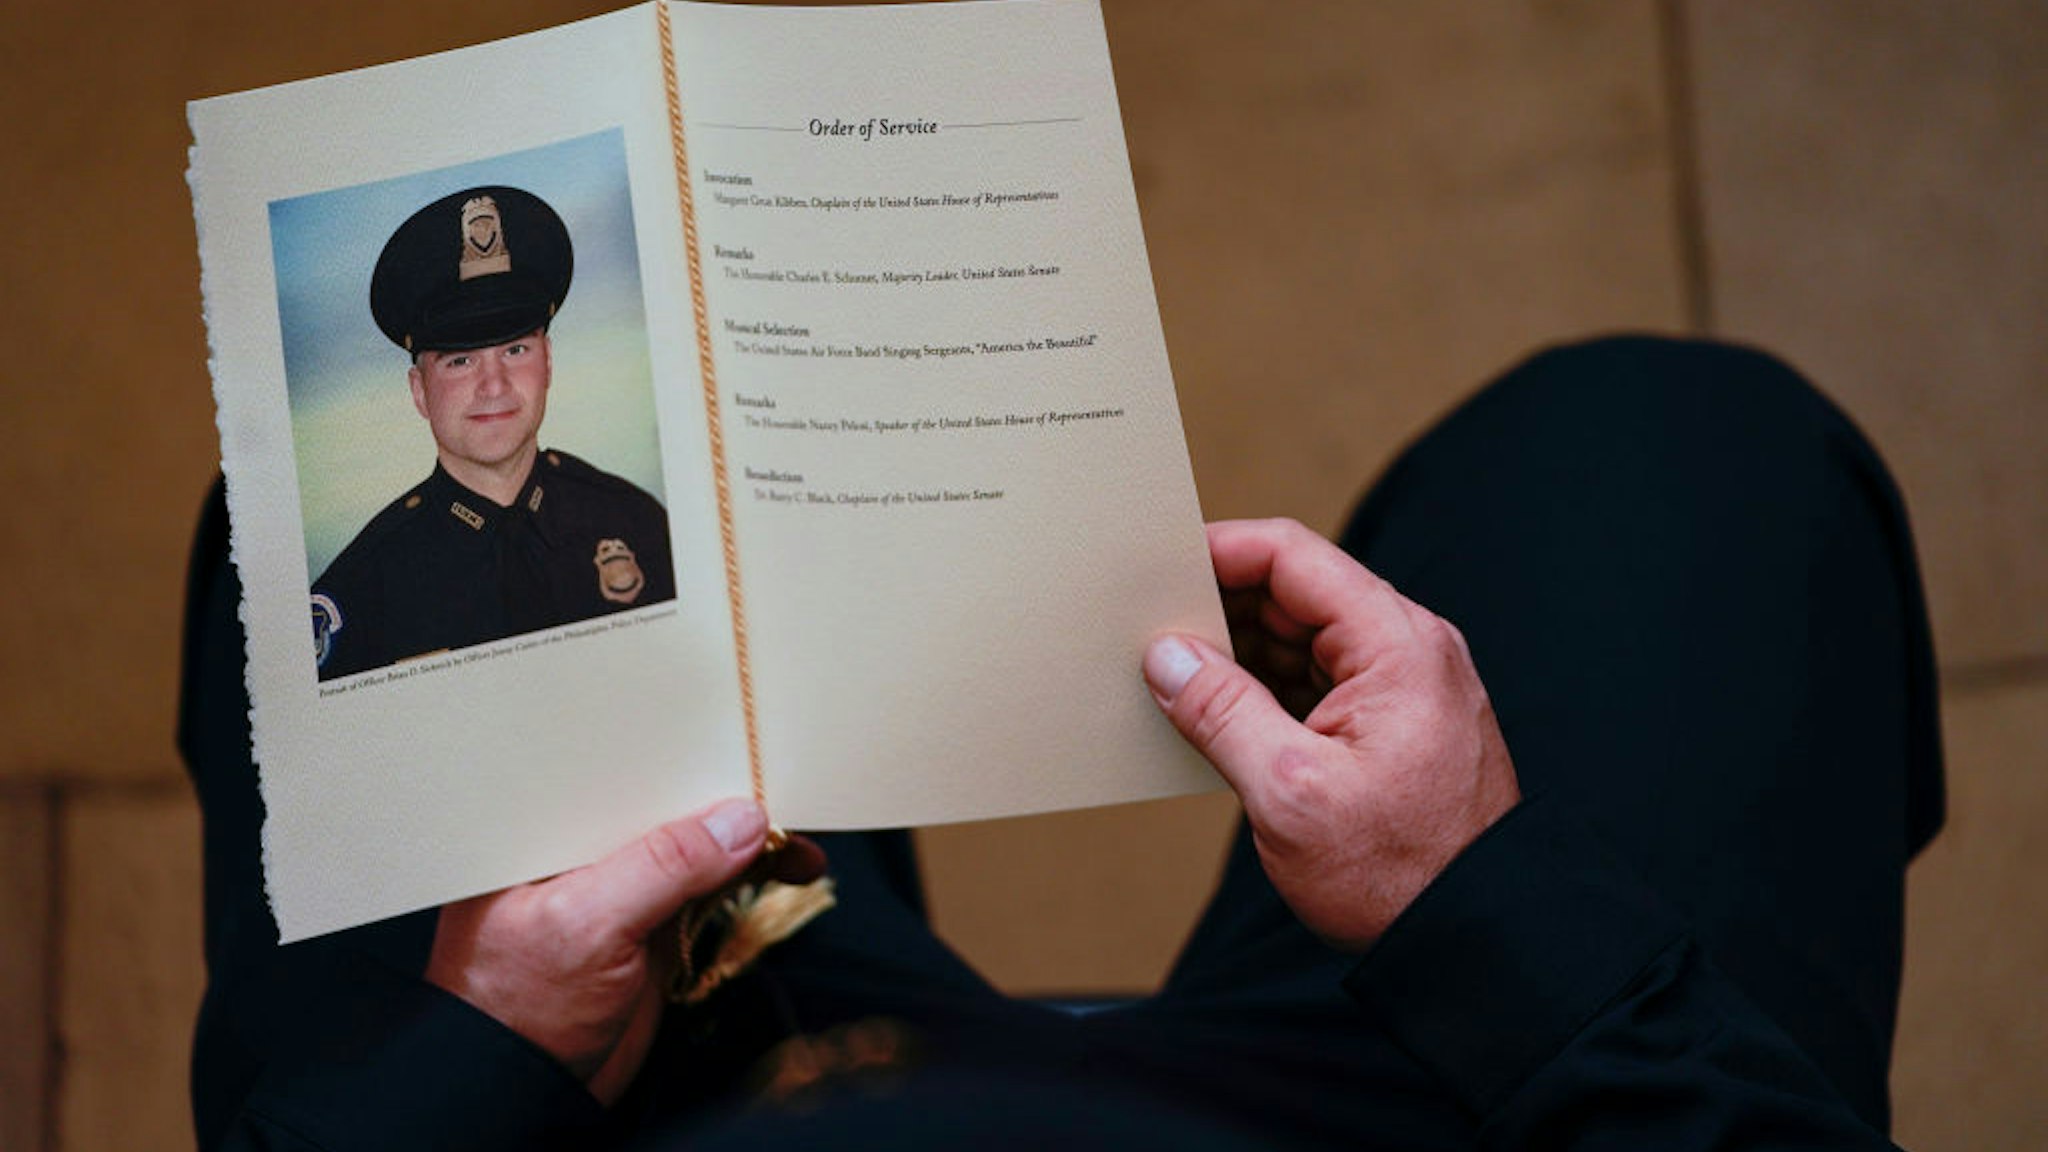 WASHINGTON, DC - FEBRUARY 3: A U.S. Capitol Police Officer holds a program for the ceremony memorializing U.S. Capitol Police Officer Brian D. Sicknick, 42, as he lies in honor in the Rotunda of the Capitol on February 3, 2021 in Washington DC. Officer Sicknick died as a result of injuries he sustained during the January 6 attack on the U.S. Capitol. He will lie in honor until February 3 and then be buried at Arlington National Cemetery.